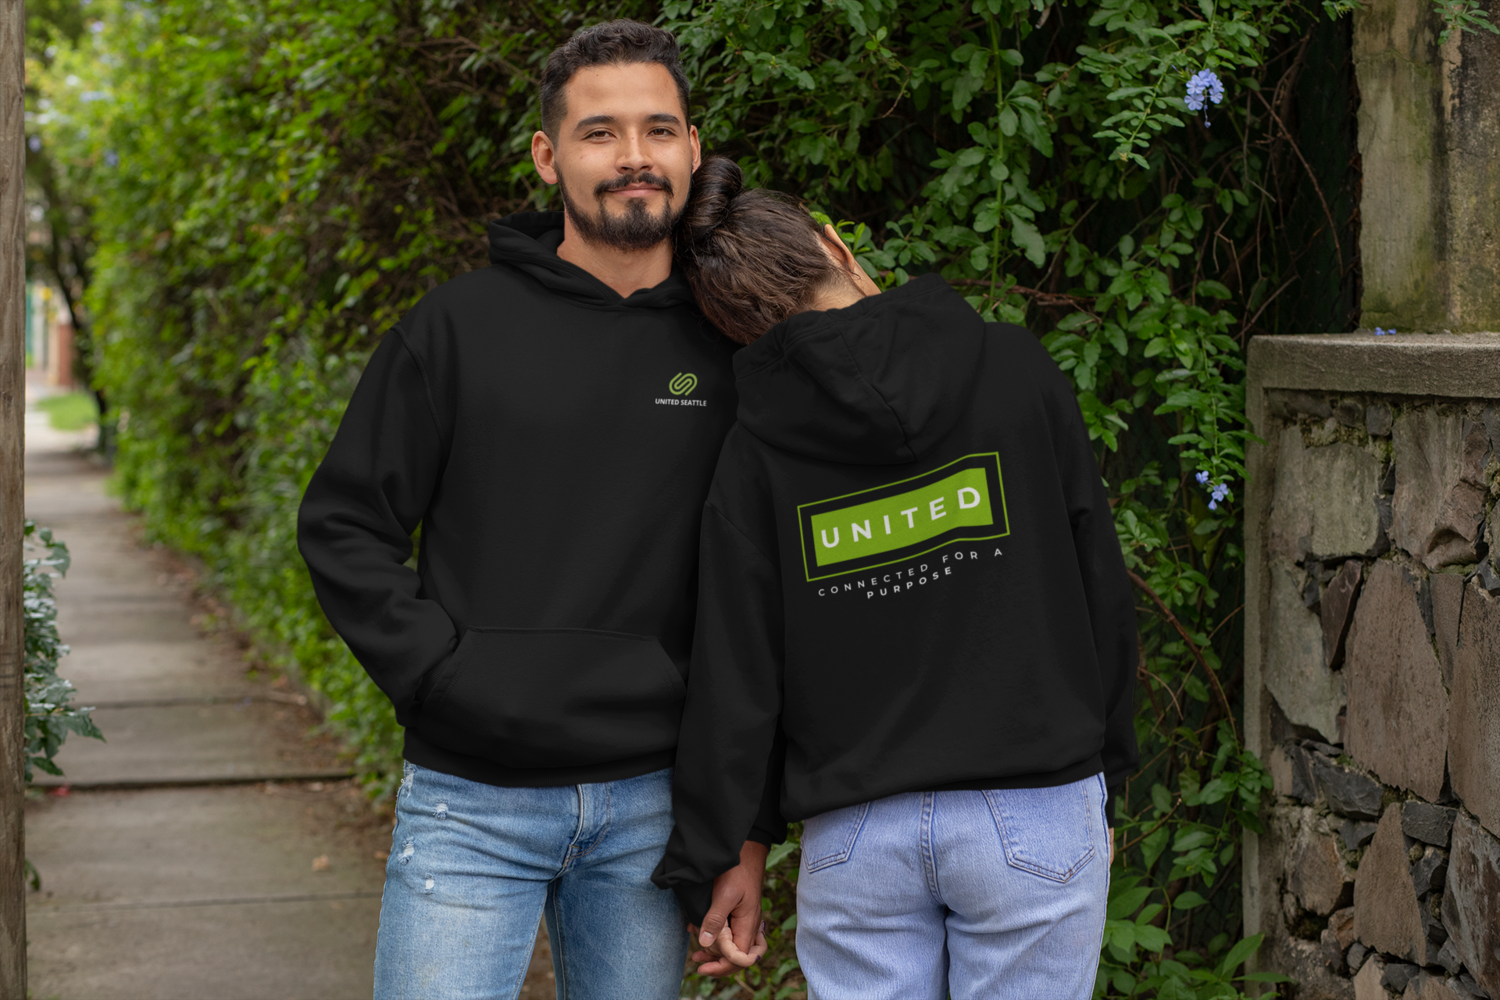 United We Stand: The 'Connected for a Purpose' Hoodie Edition